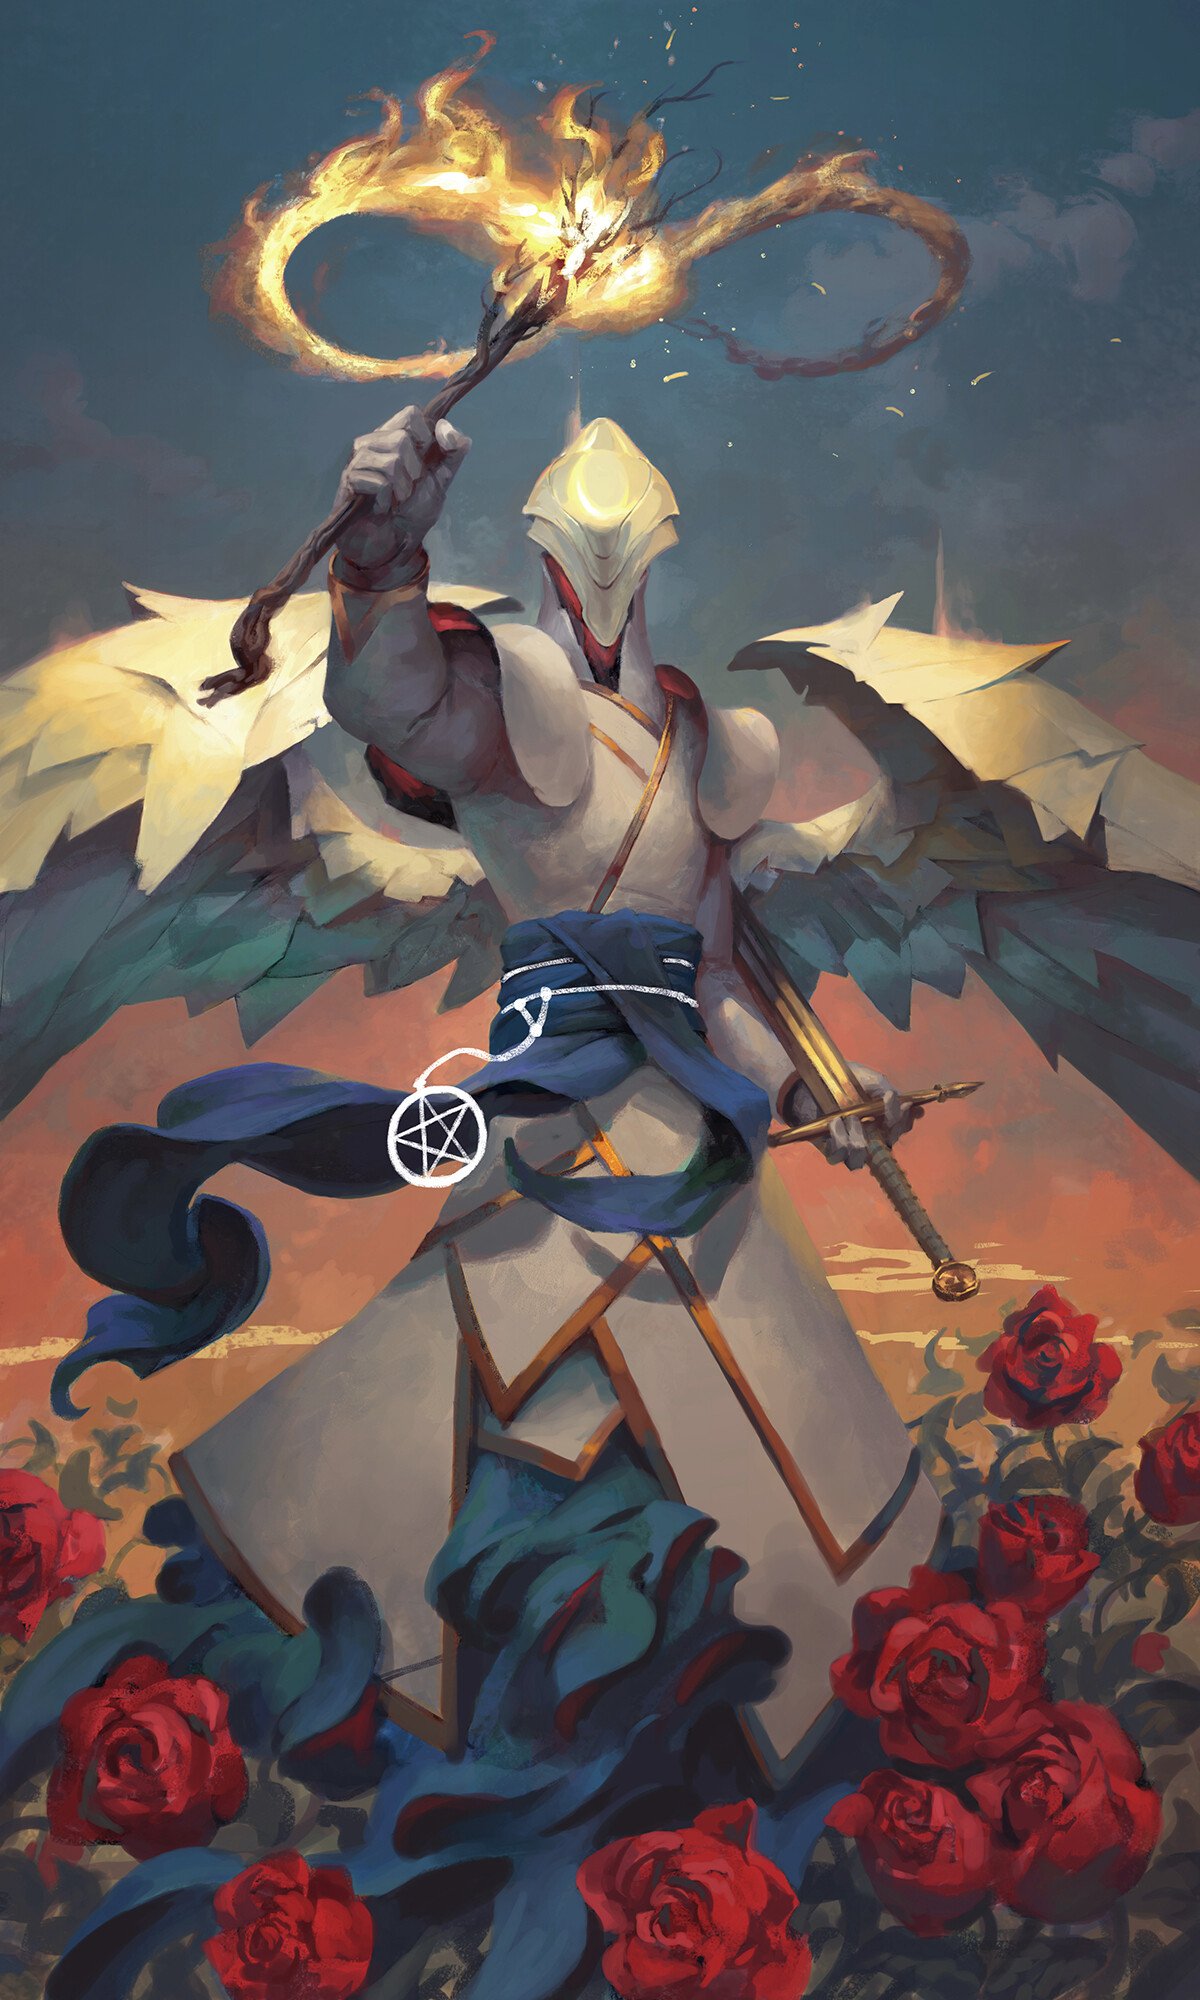 Peter Mohrbacher Blends Surrealism With Fantasy To Create Powerful Magical Beings (8)